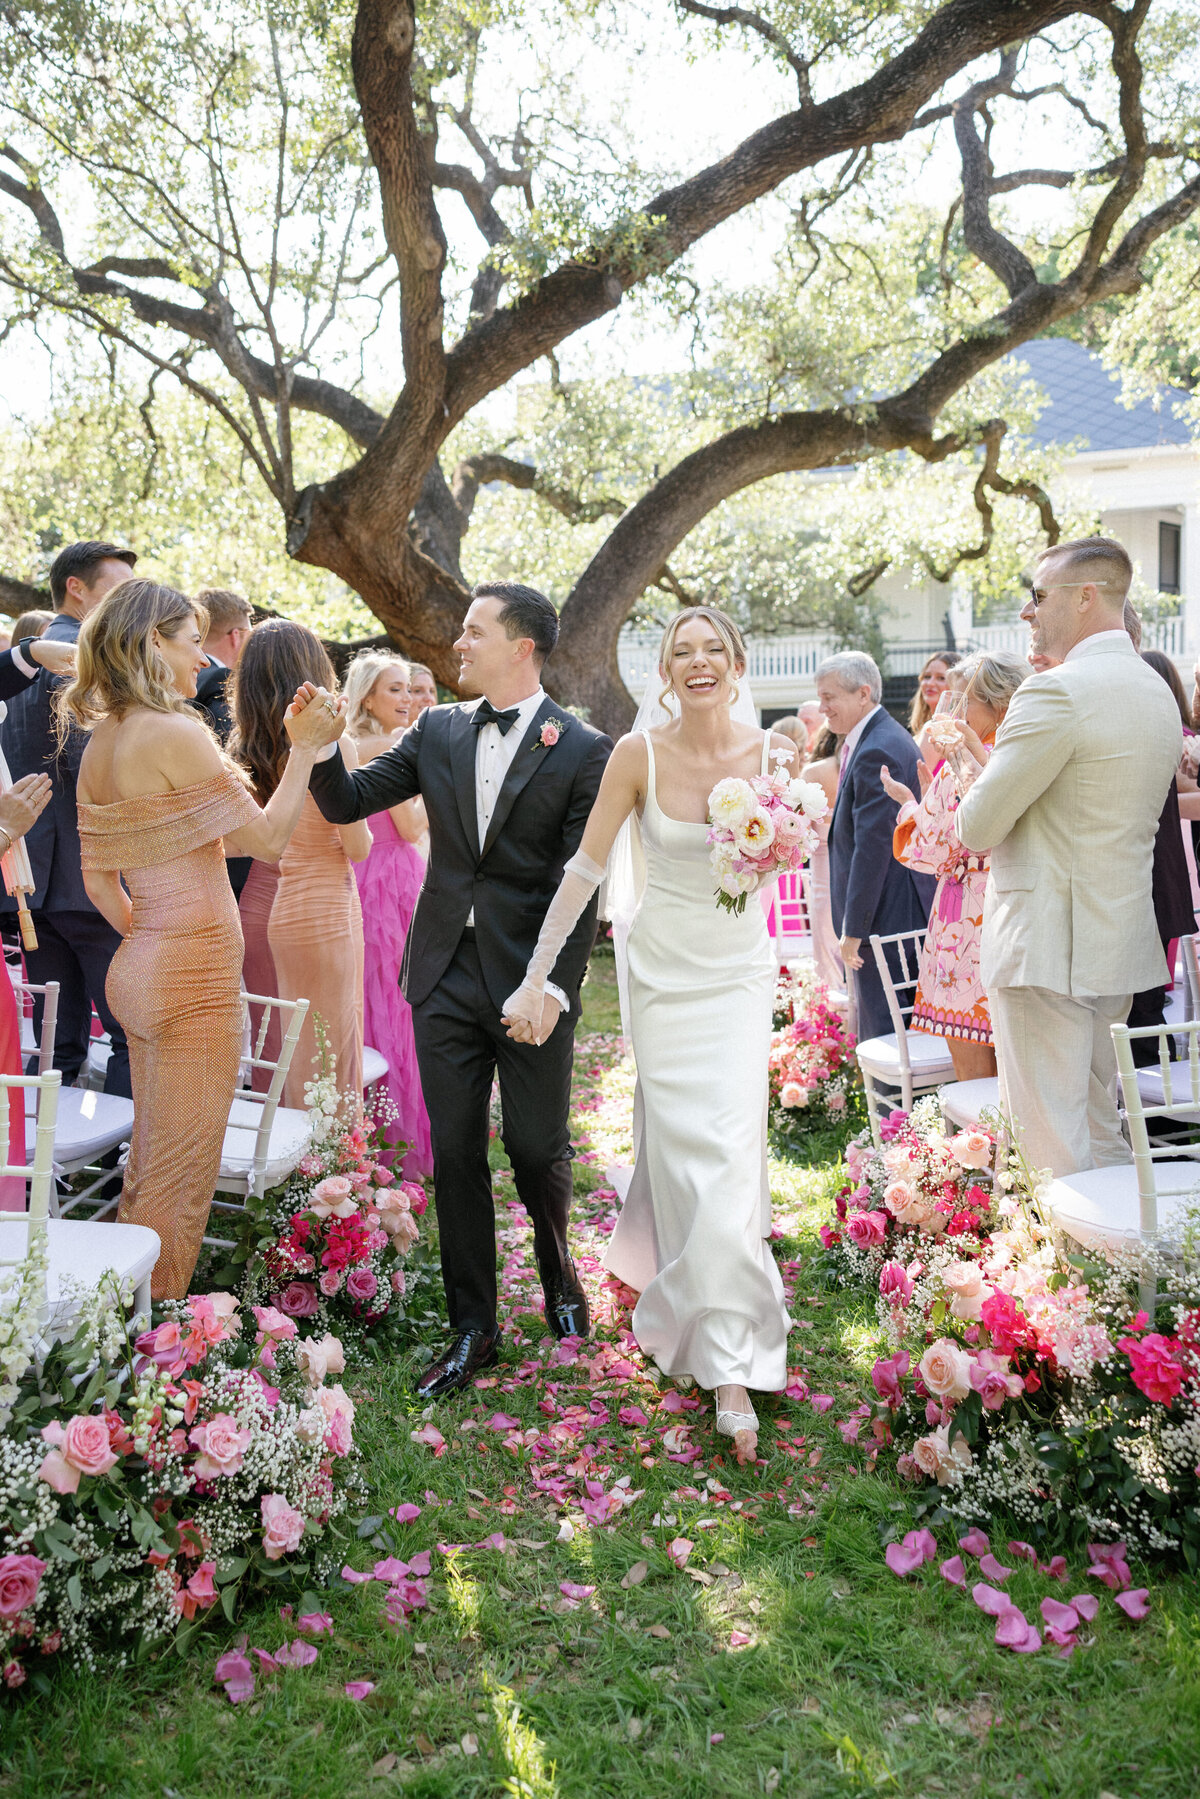 bride and groom recessing at wedding reception outdoors with pink florals